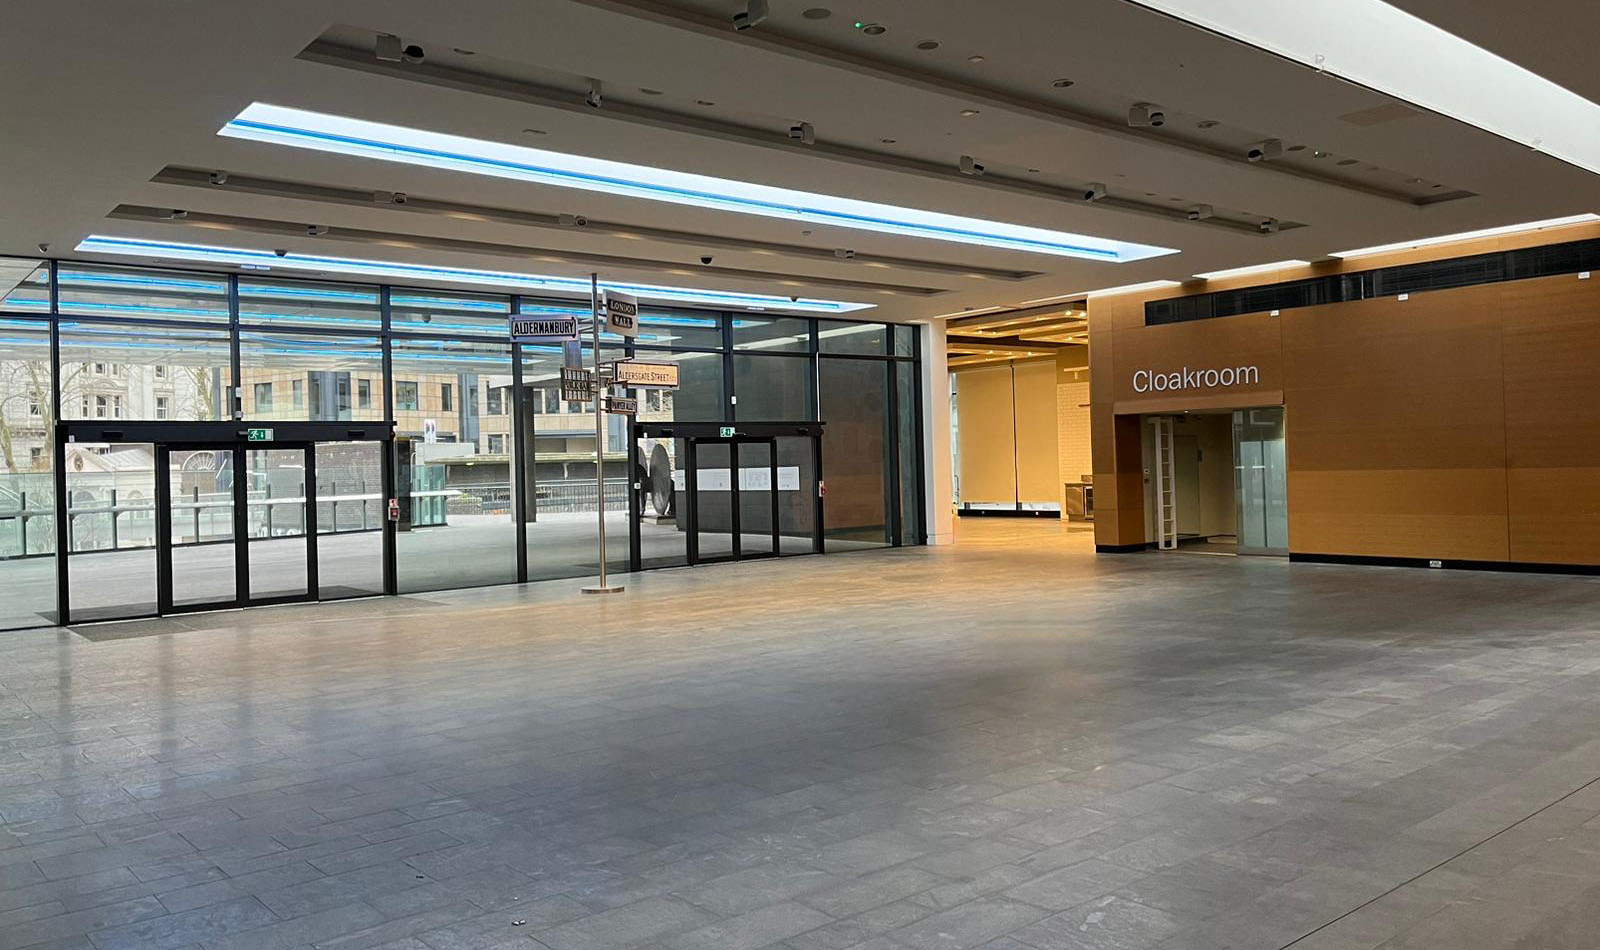 Entrance Hall at Museum of London after the closure